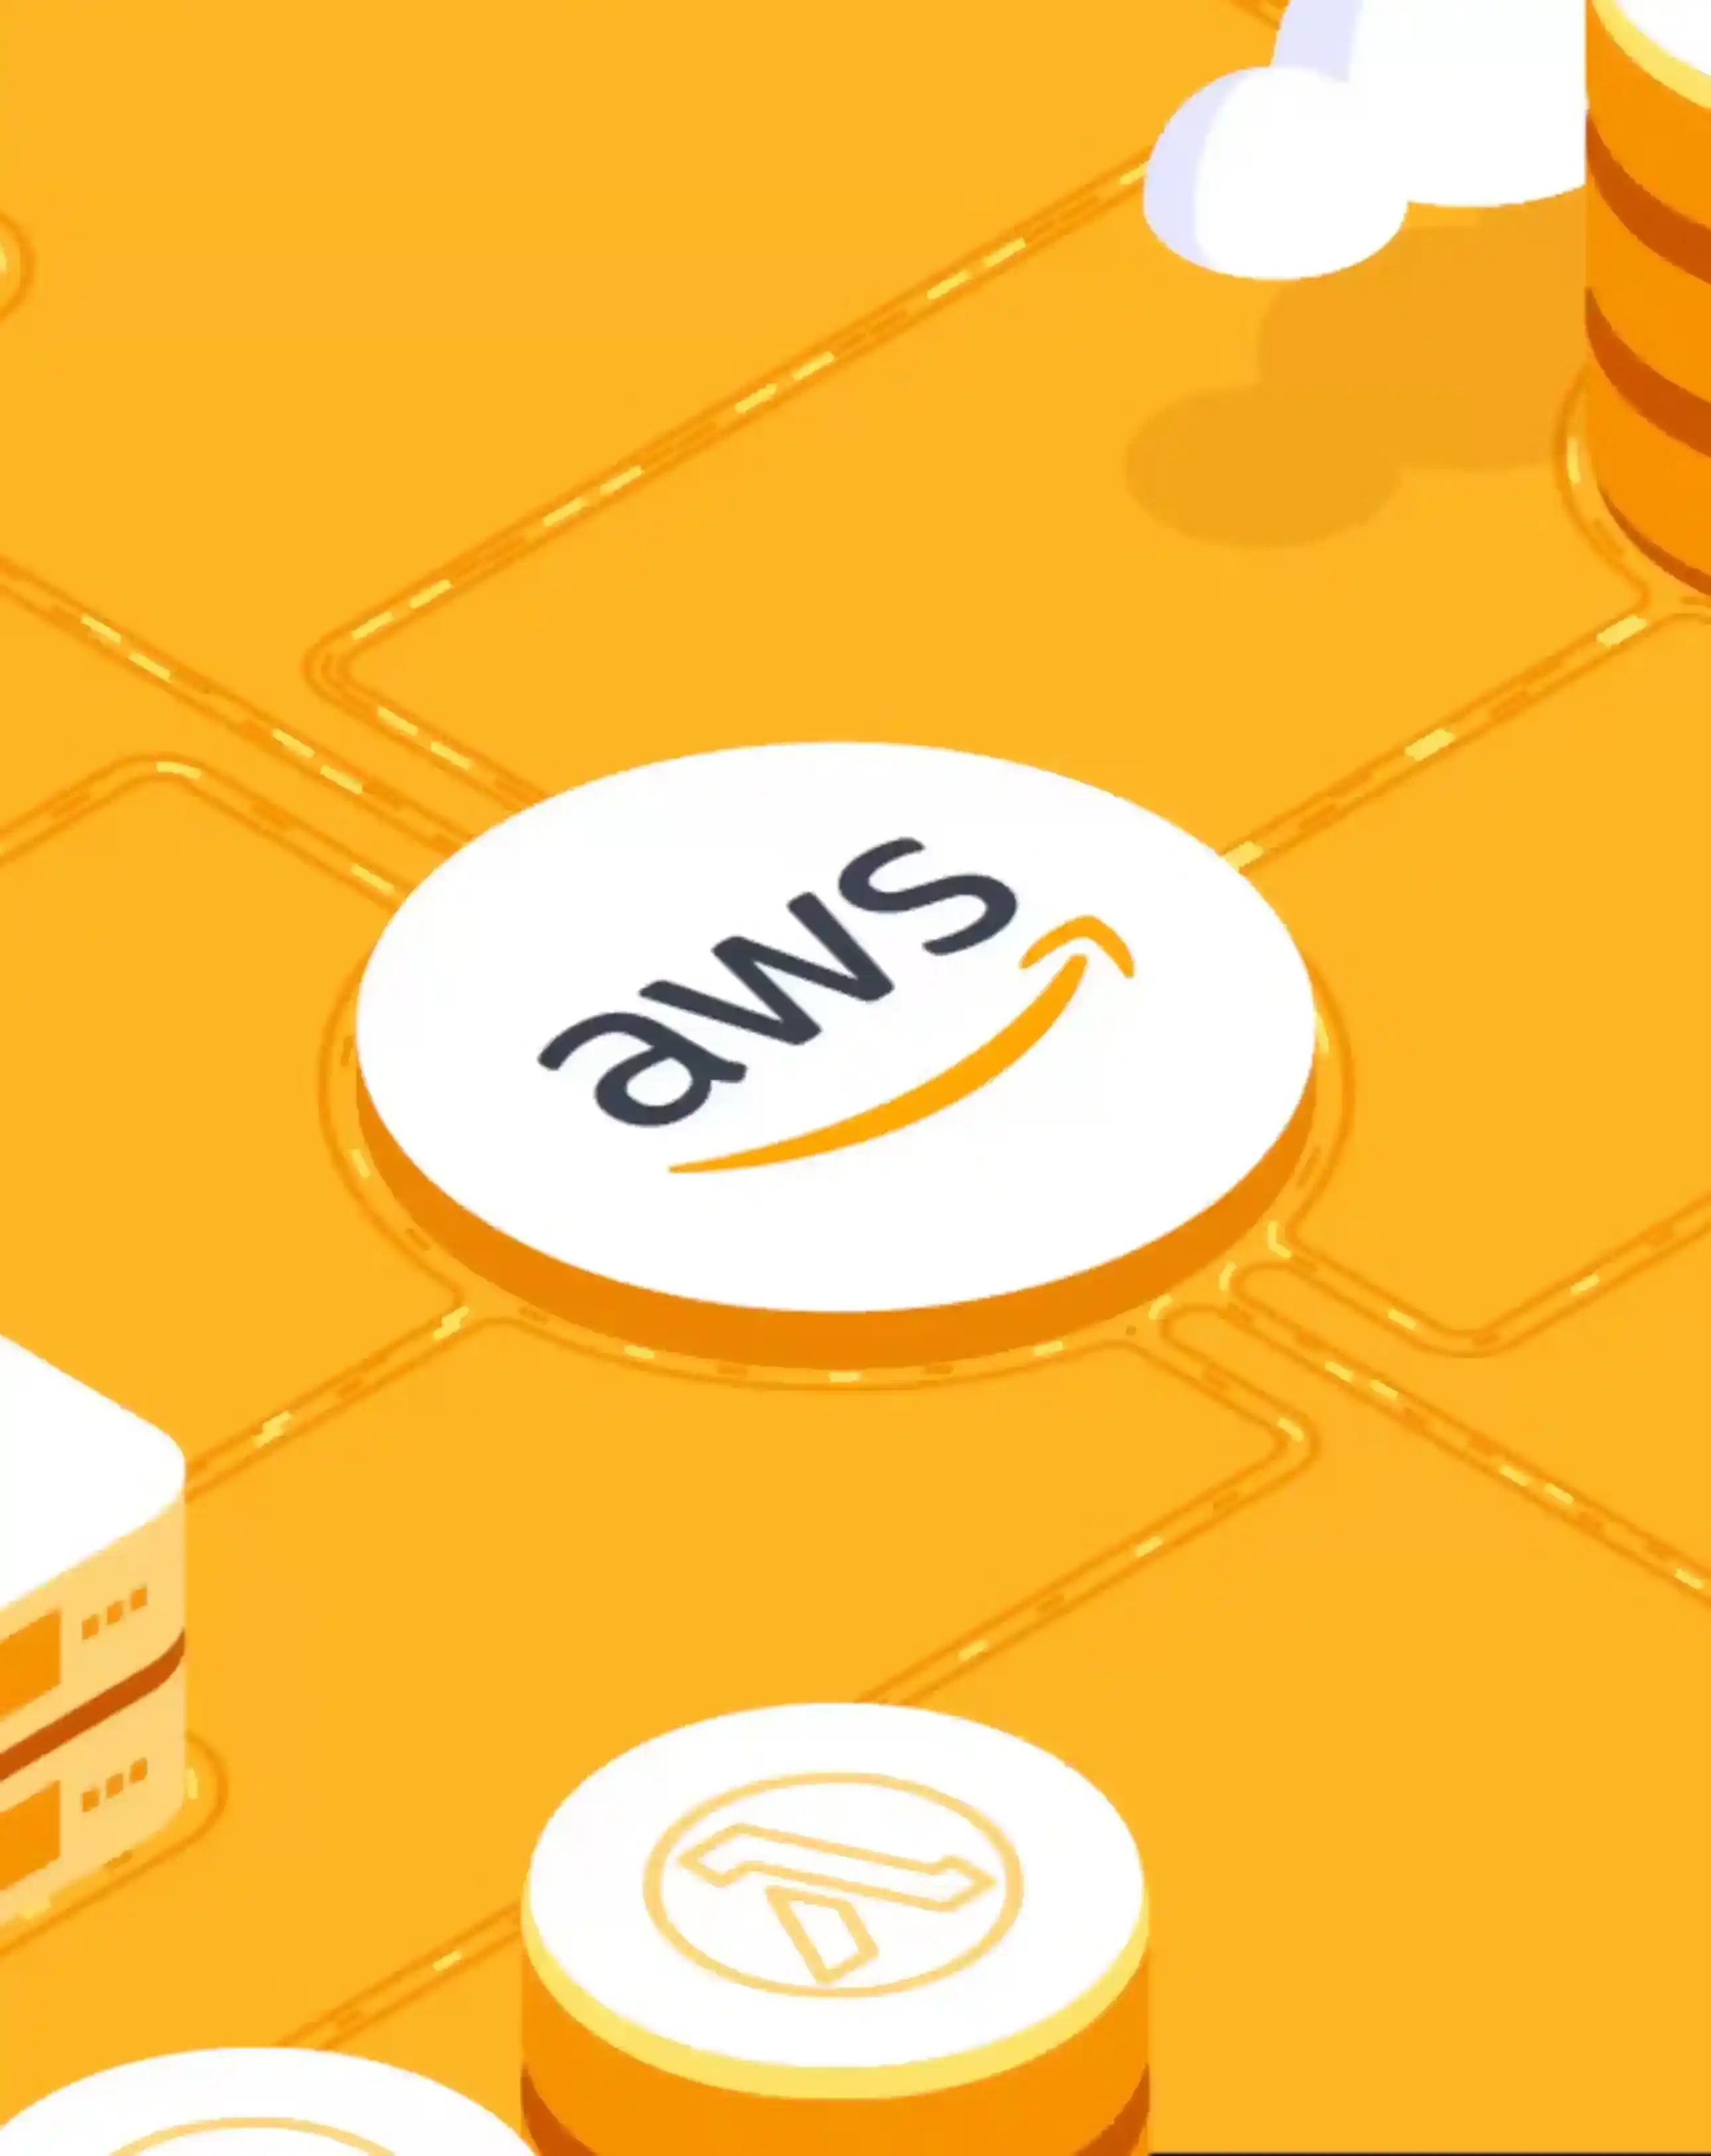 Built the cloud infrastructure on AWS services and containerized the applications